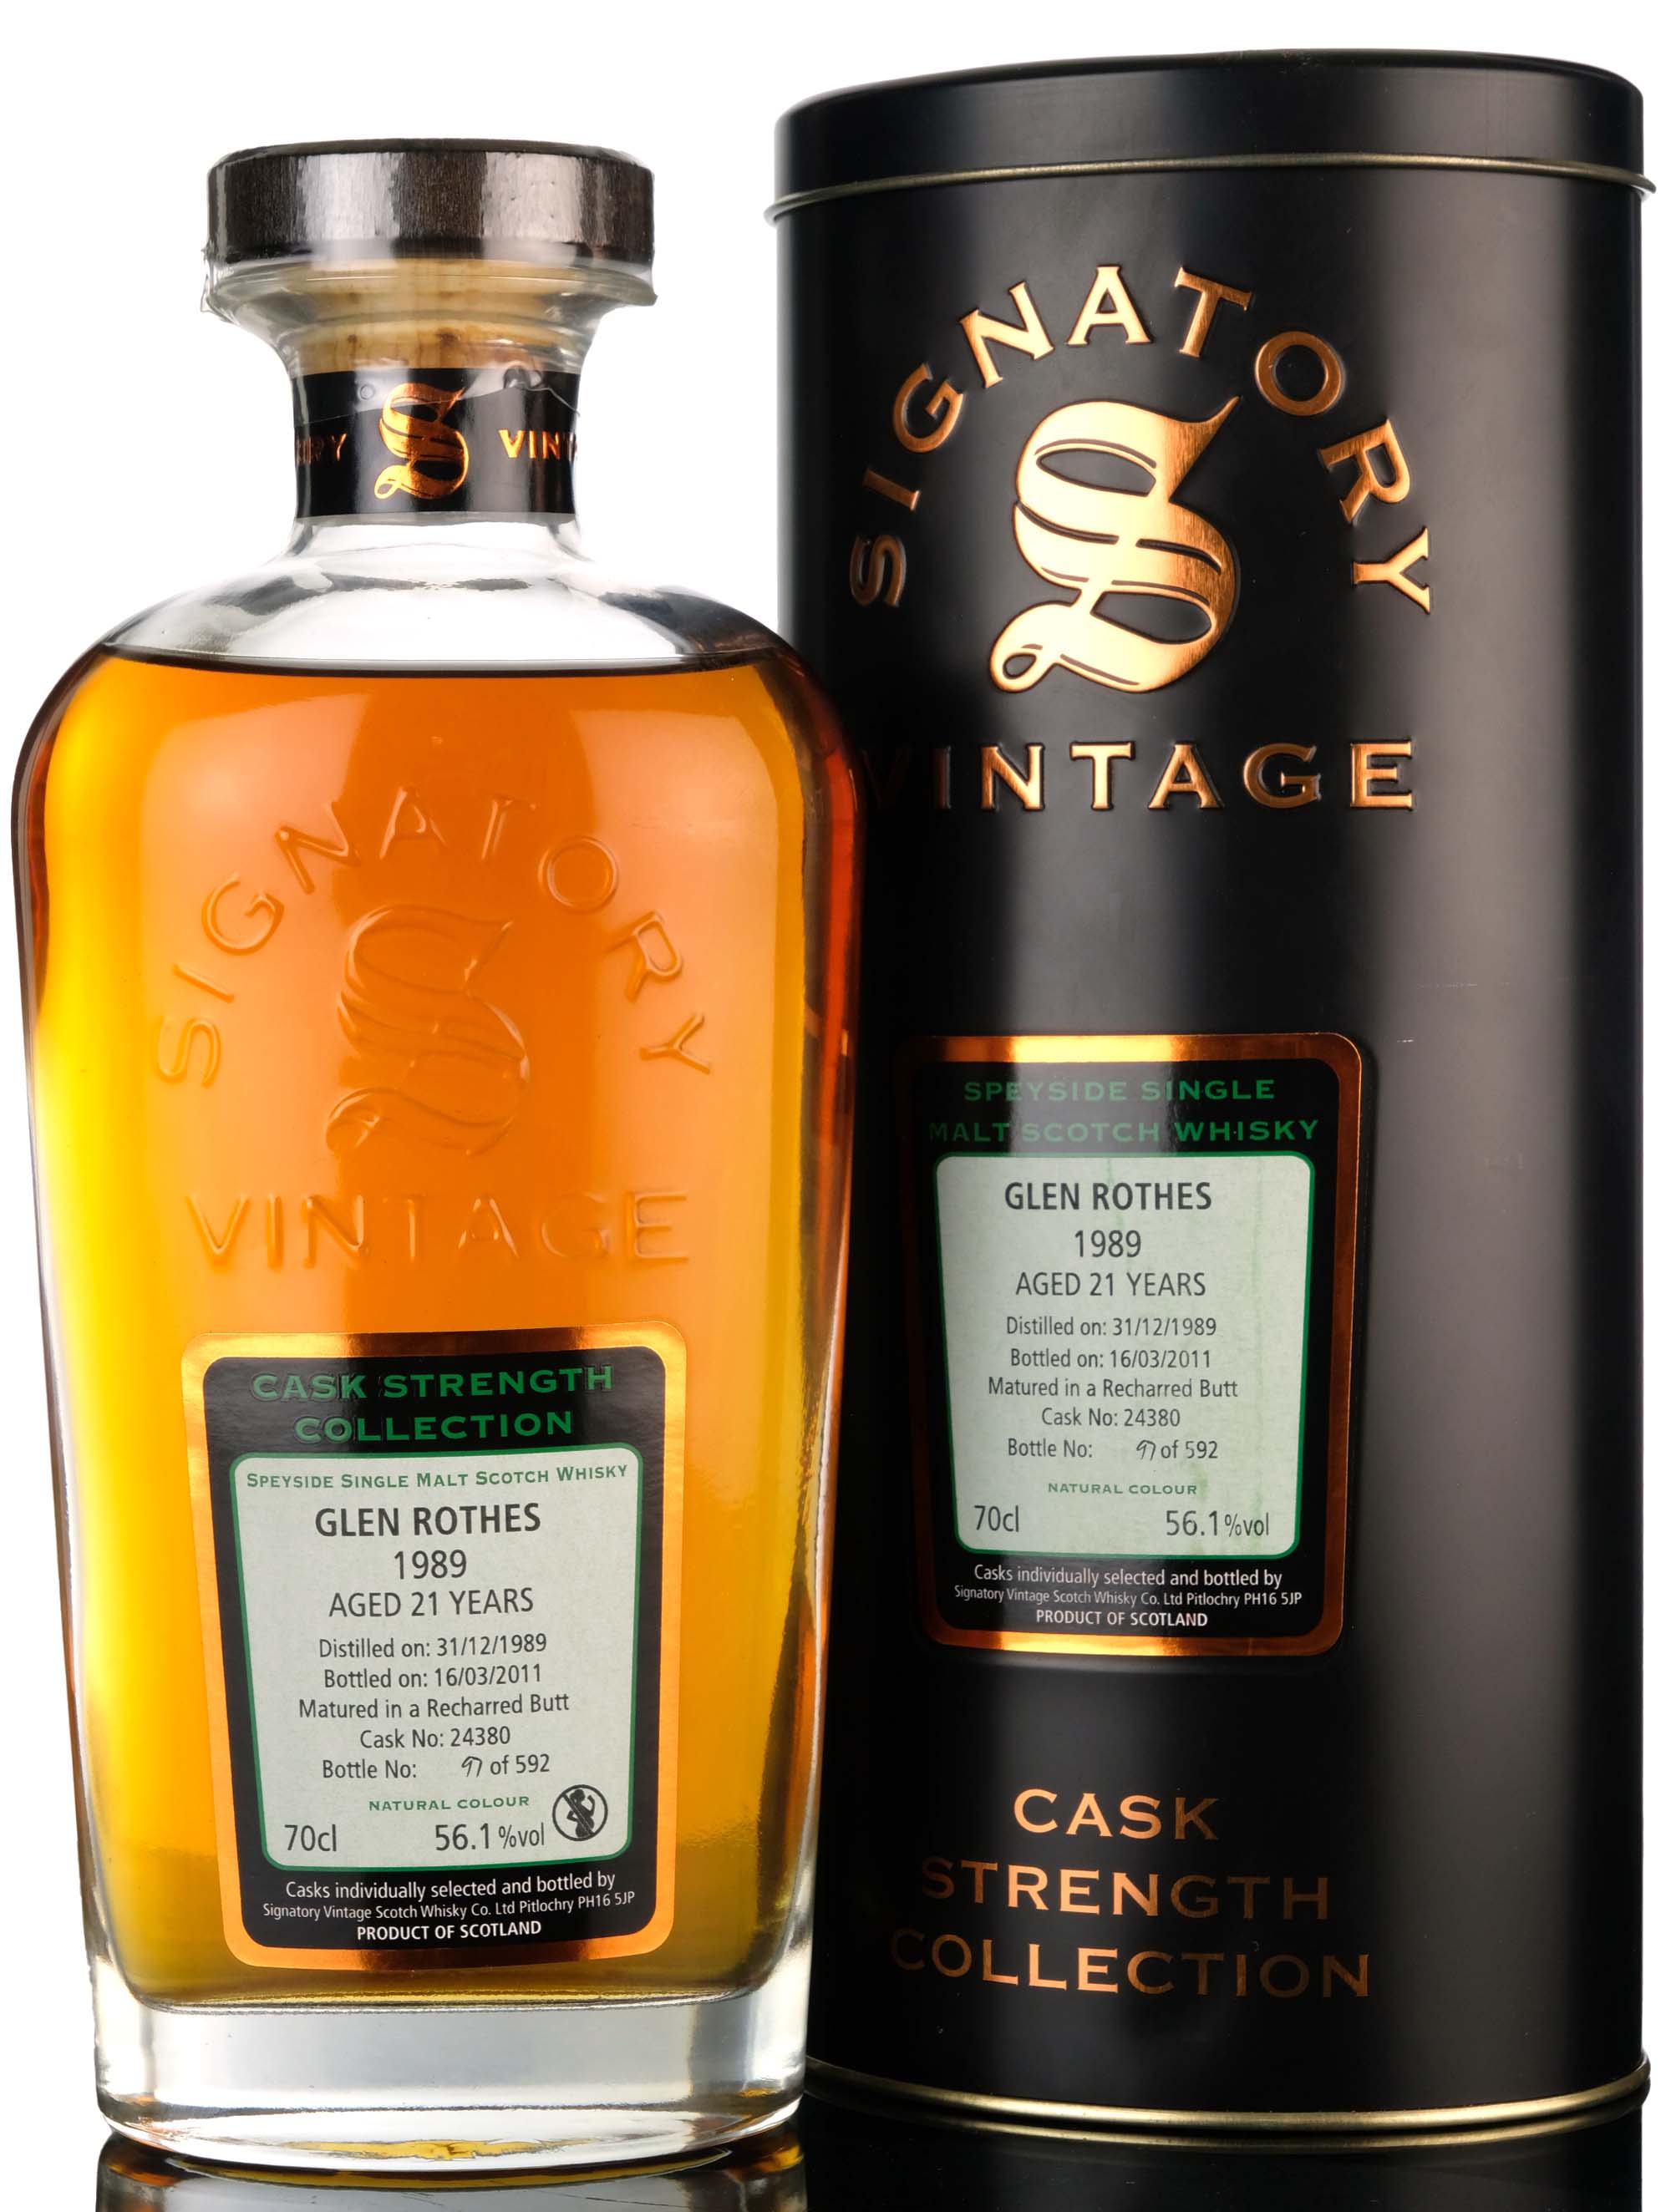 Glenrothes 1989-2001 - 21 Year Old - Signatory Vintage - Cask Strength Collection - Single